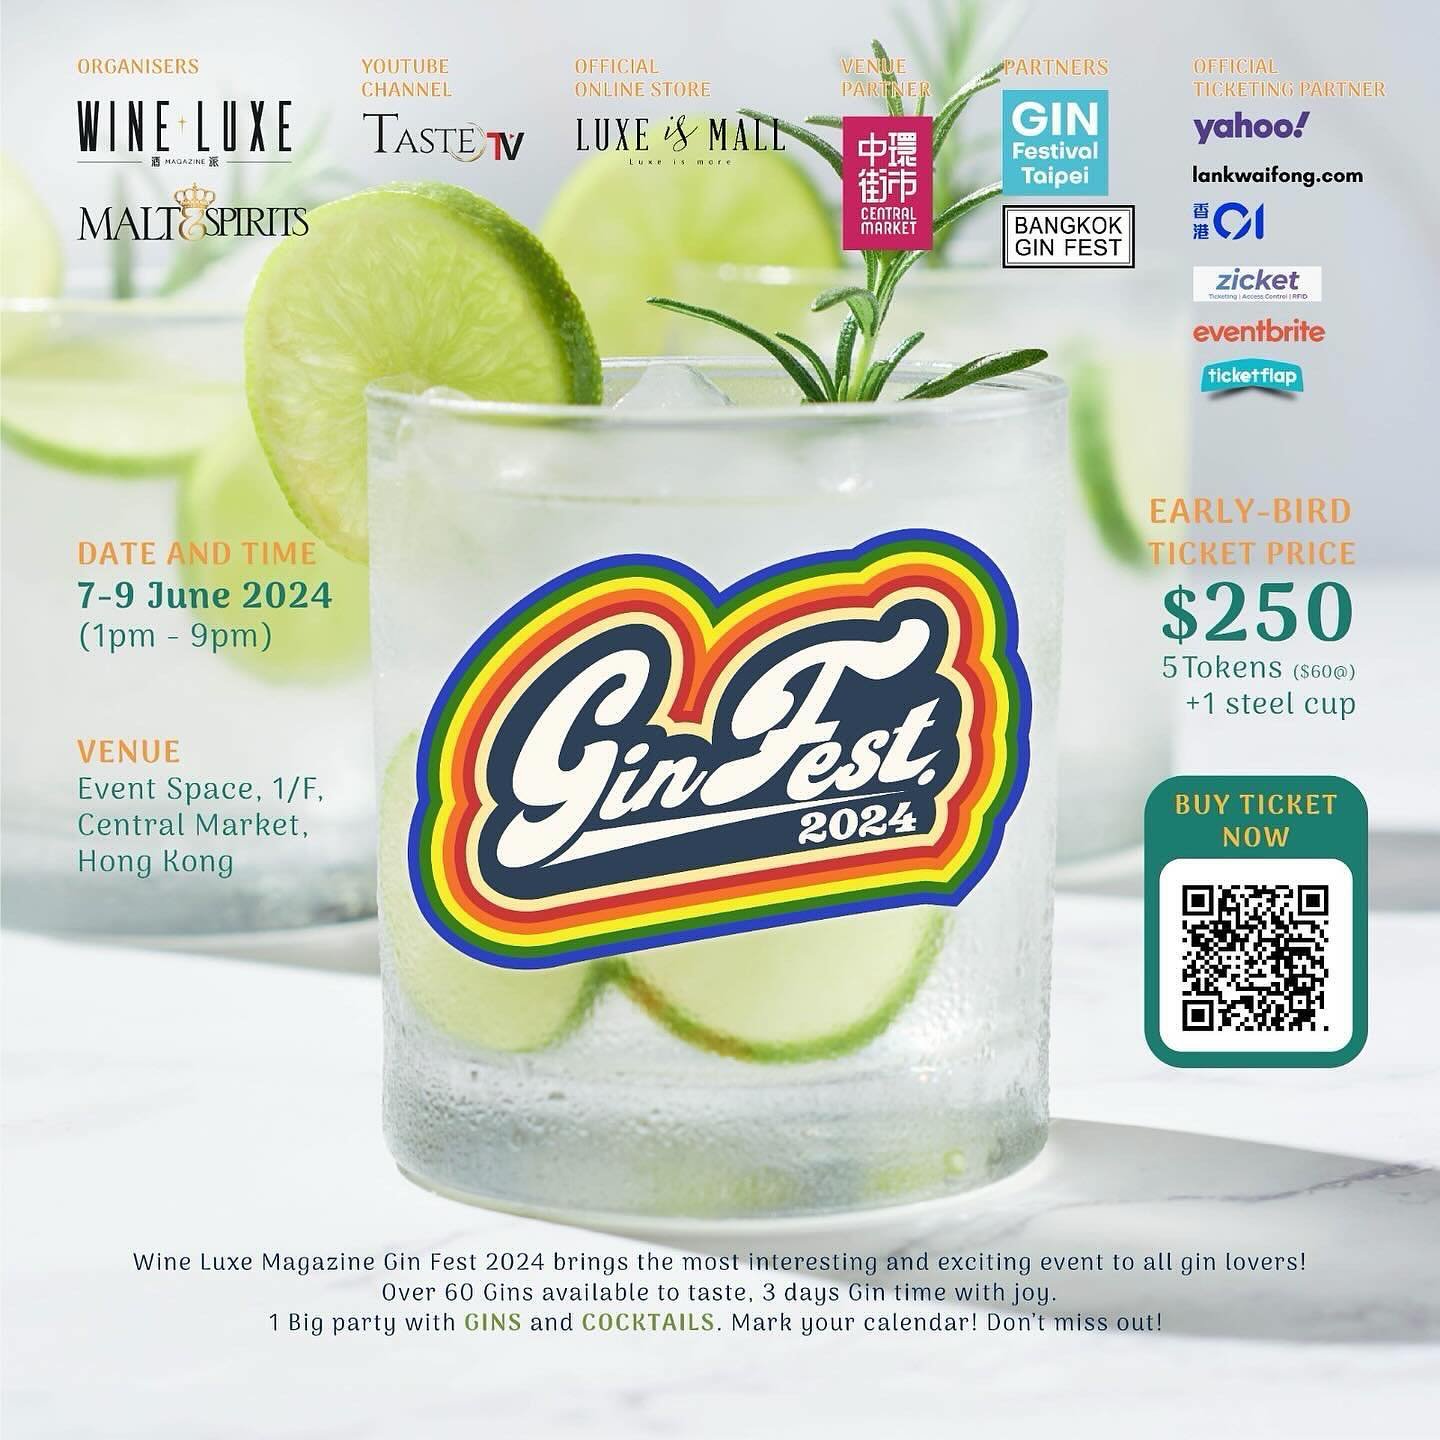 GIN FEST Hong Kong confirmed in Alliance with Gin Festival Taipei and Bangkok Gin Fest this year‼️

Join us for GIN FEST 2024 on 7-9 June WORLD GIN DAY! Experience an extraordinary selection of GIN and Cocktails from around the globe. 

Get your Earl